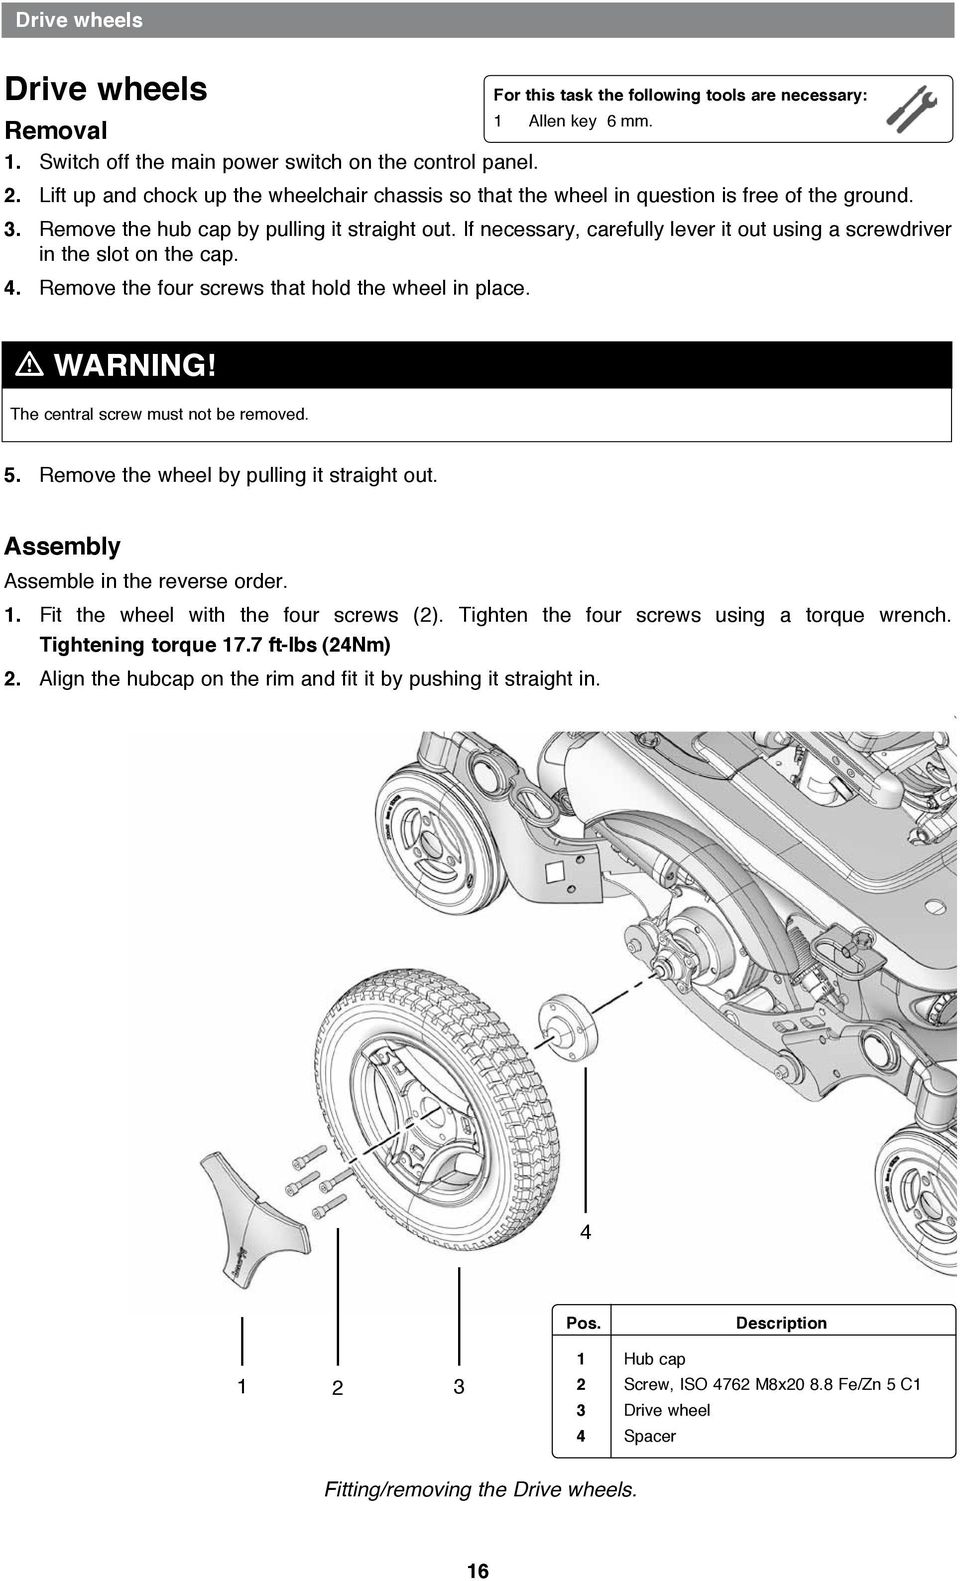 free step by step permobil m 300 connection wiring diagram and harness